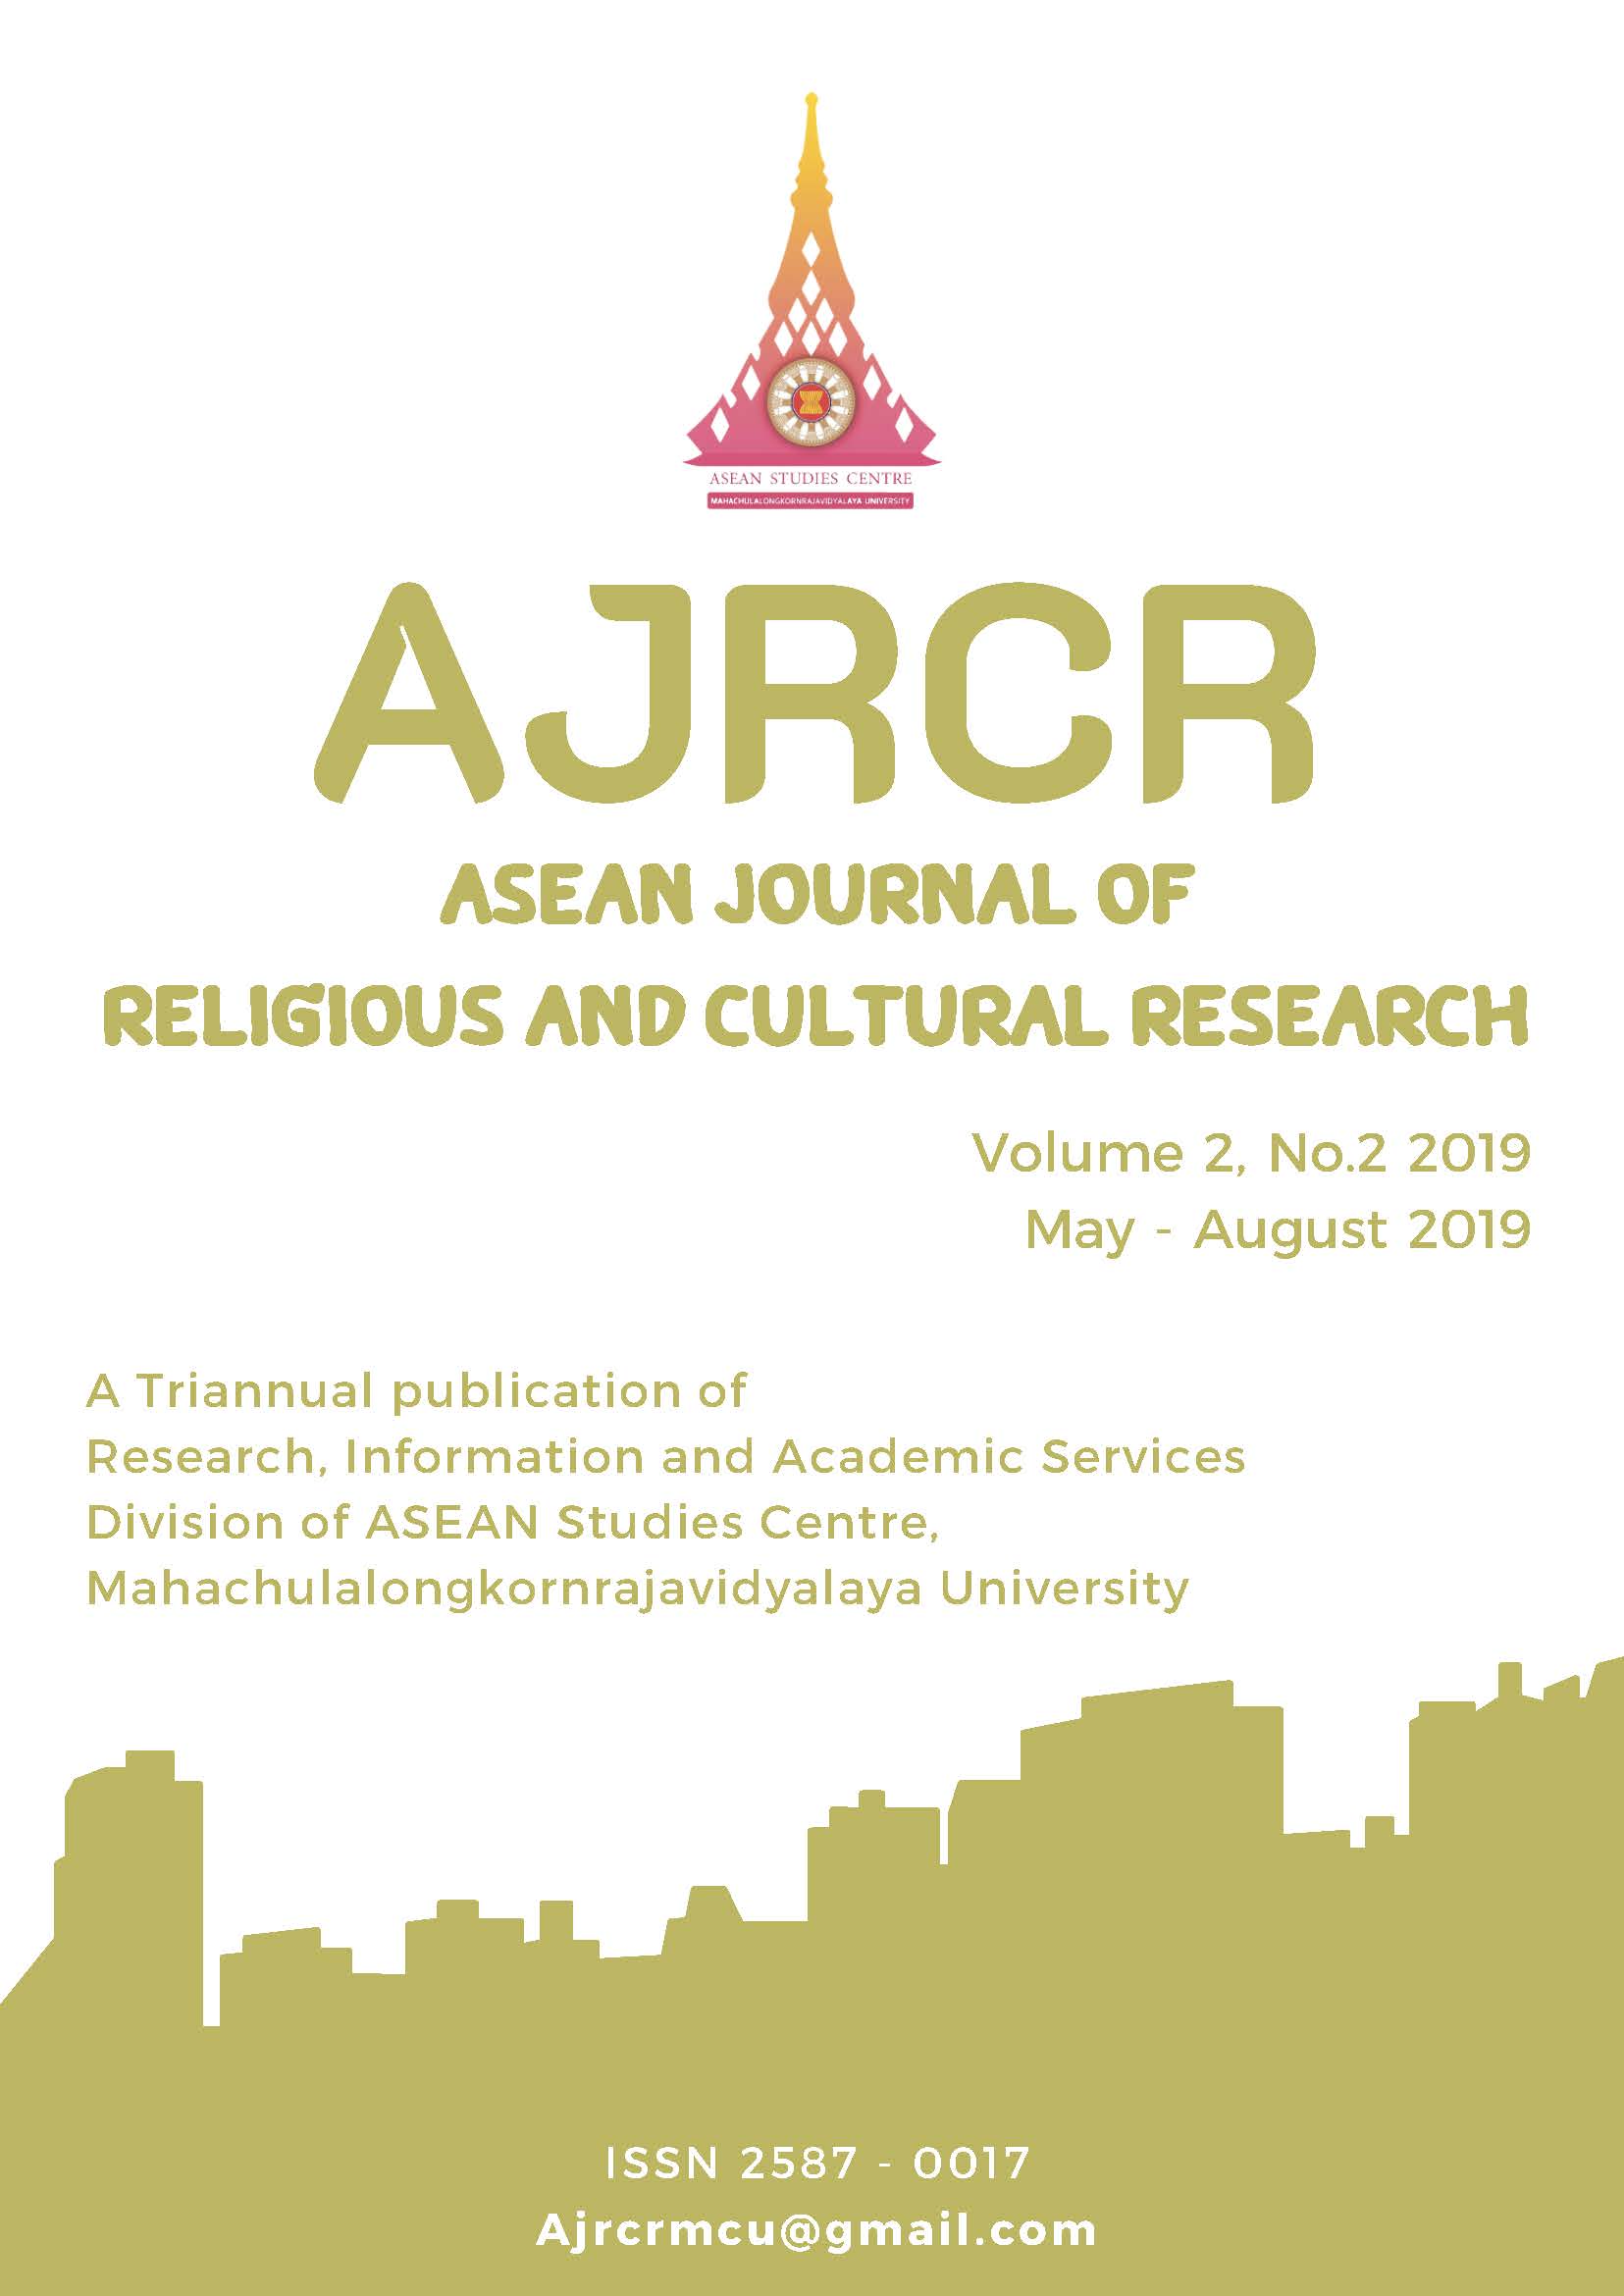 					View Vol. 2 No. 2 (2019): ASEAN Journal of Religious and Cultural Research (AJRCR)
				